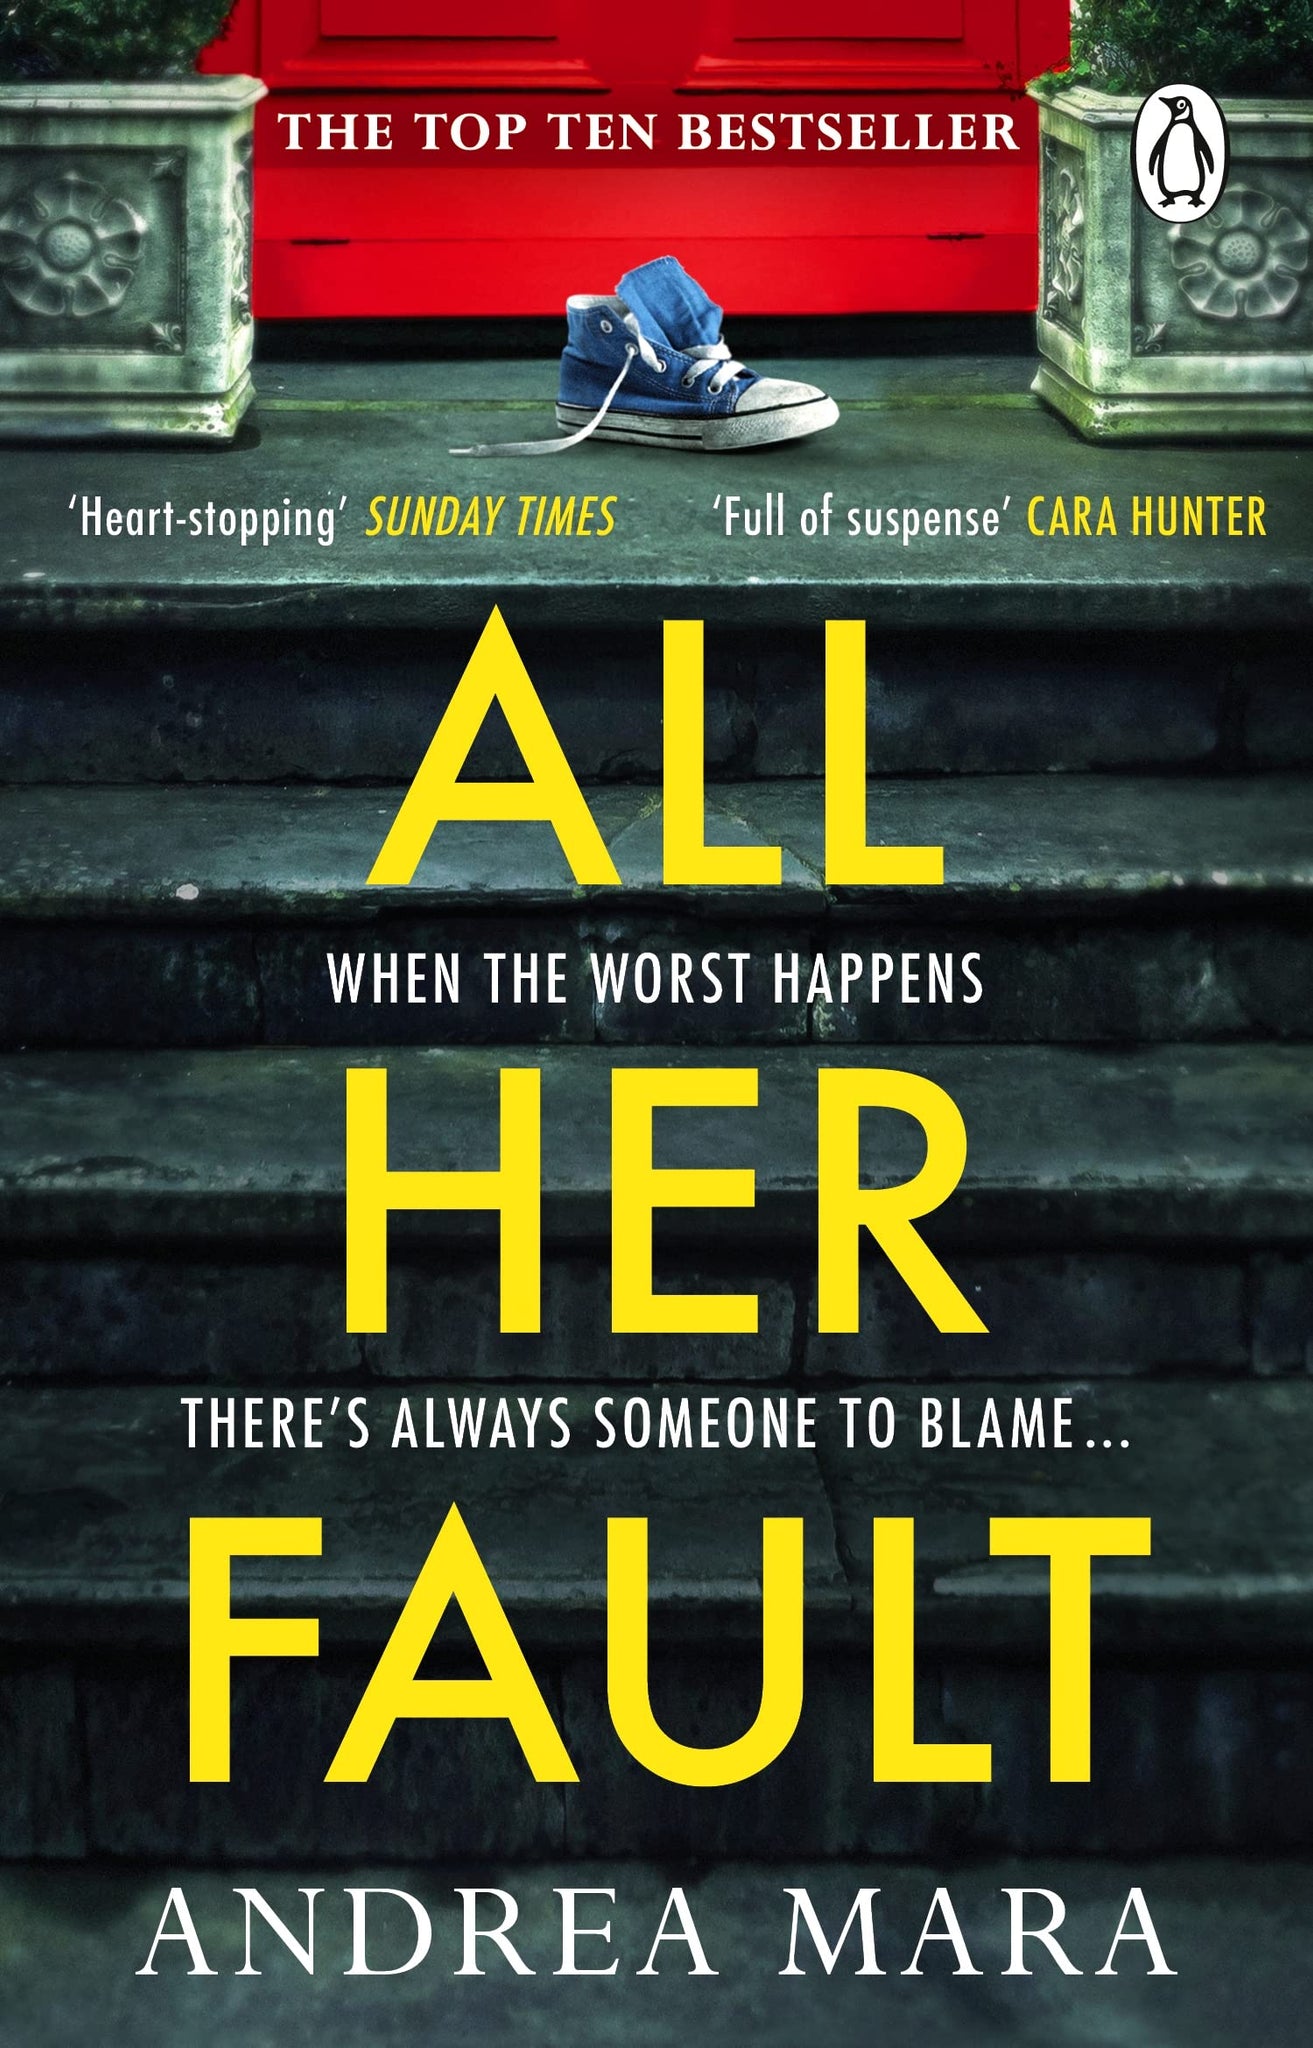 All Her Fault - Paperback